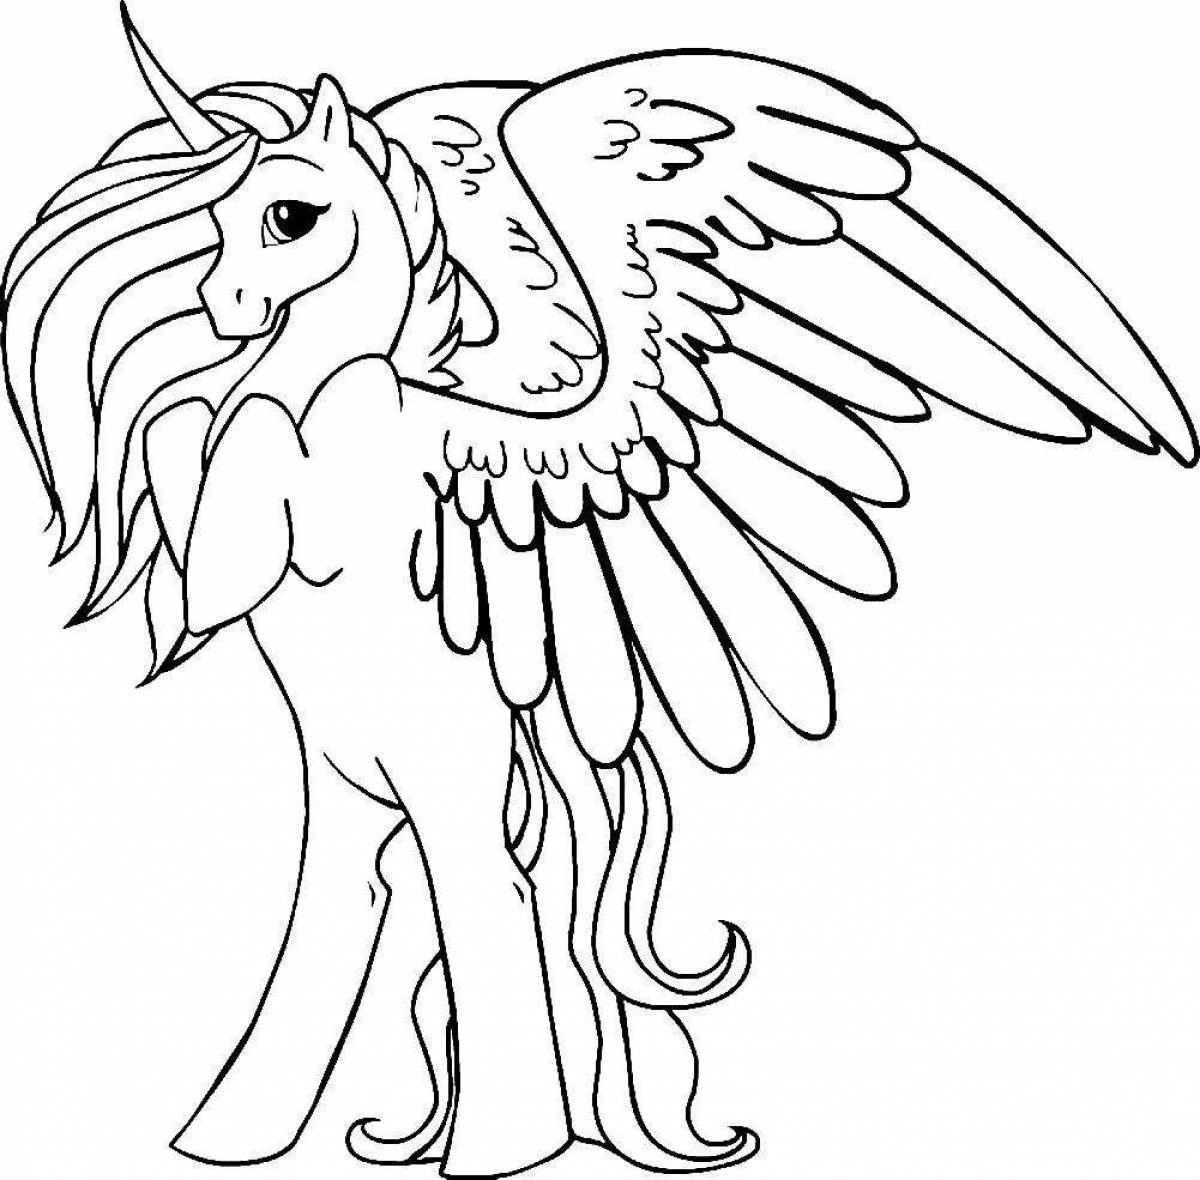 Charming unicorn horse coloring book